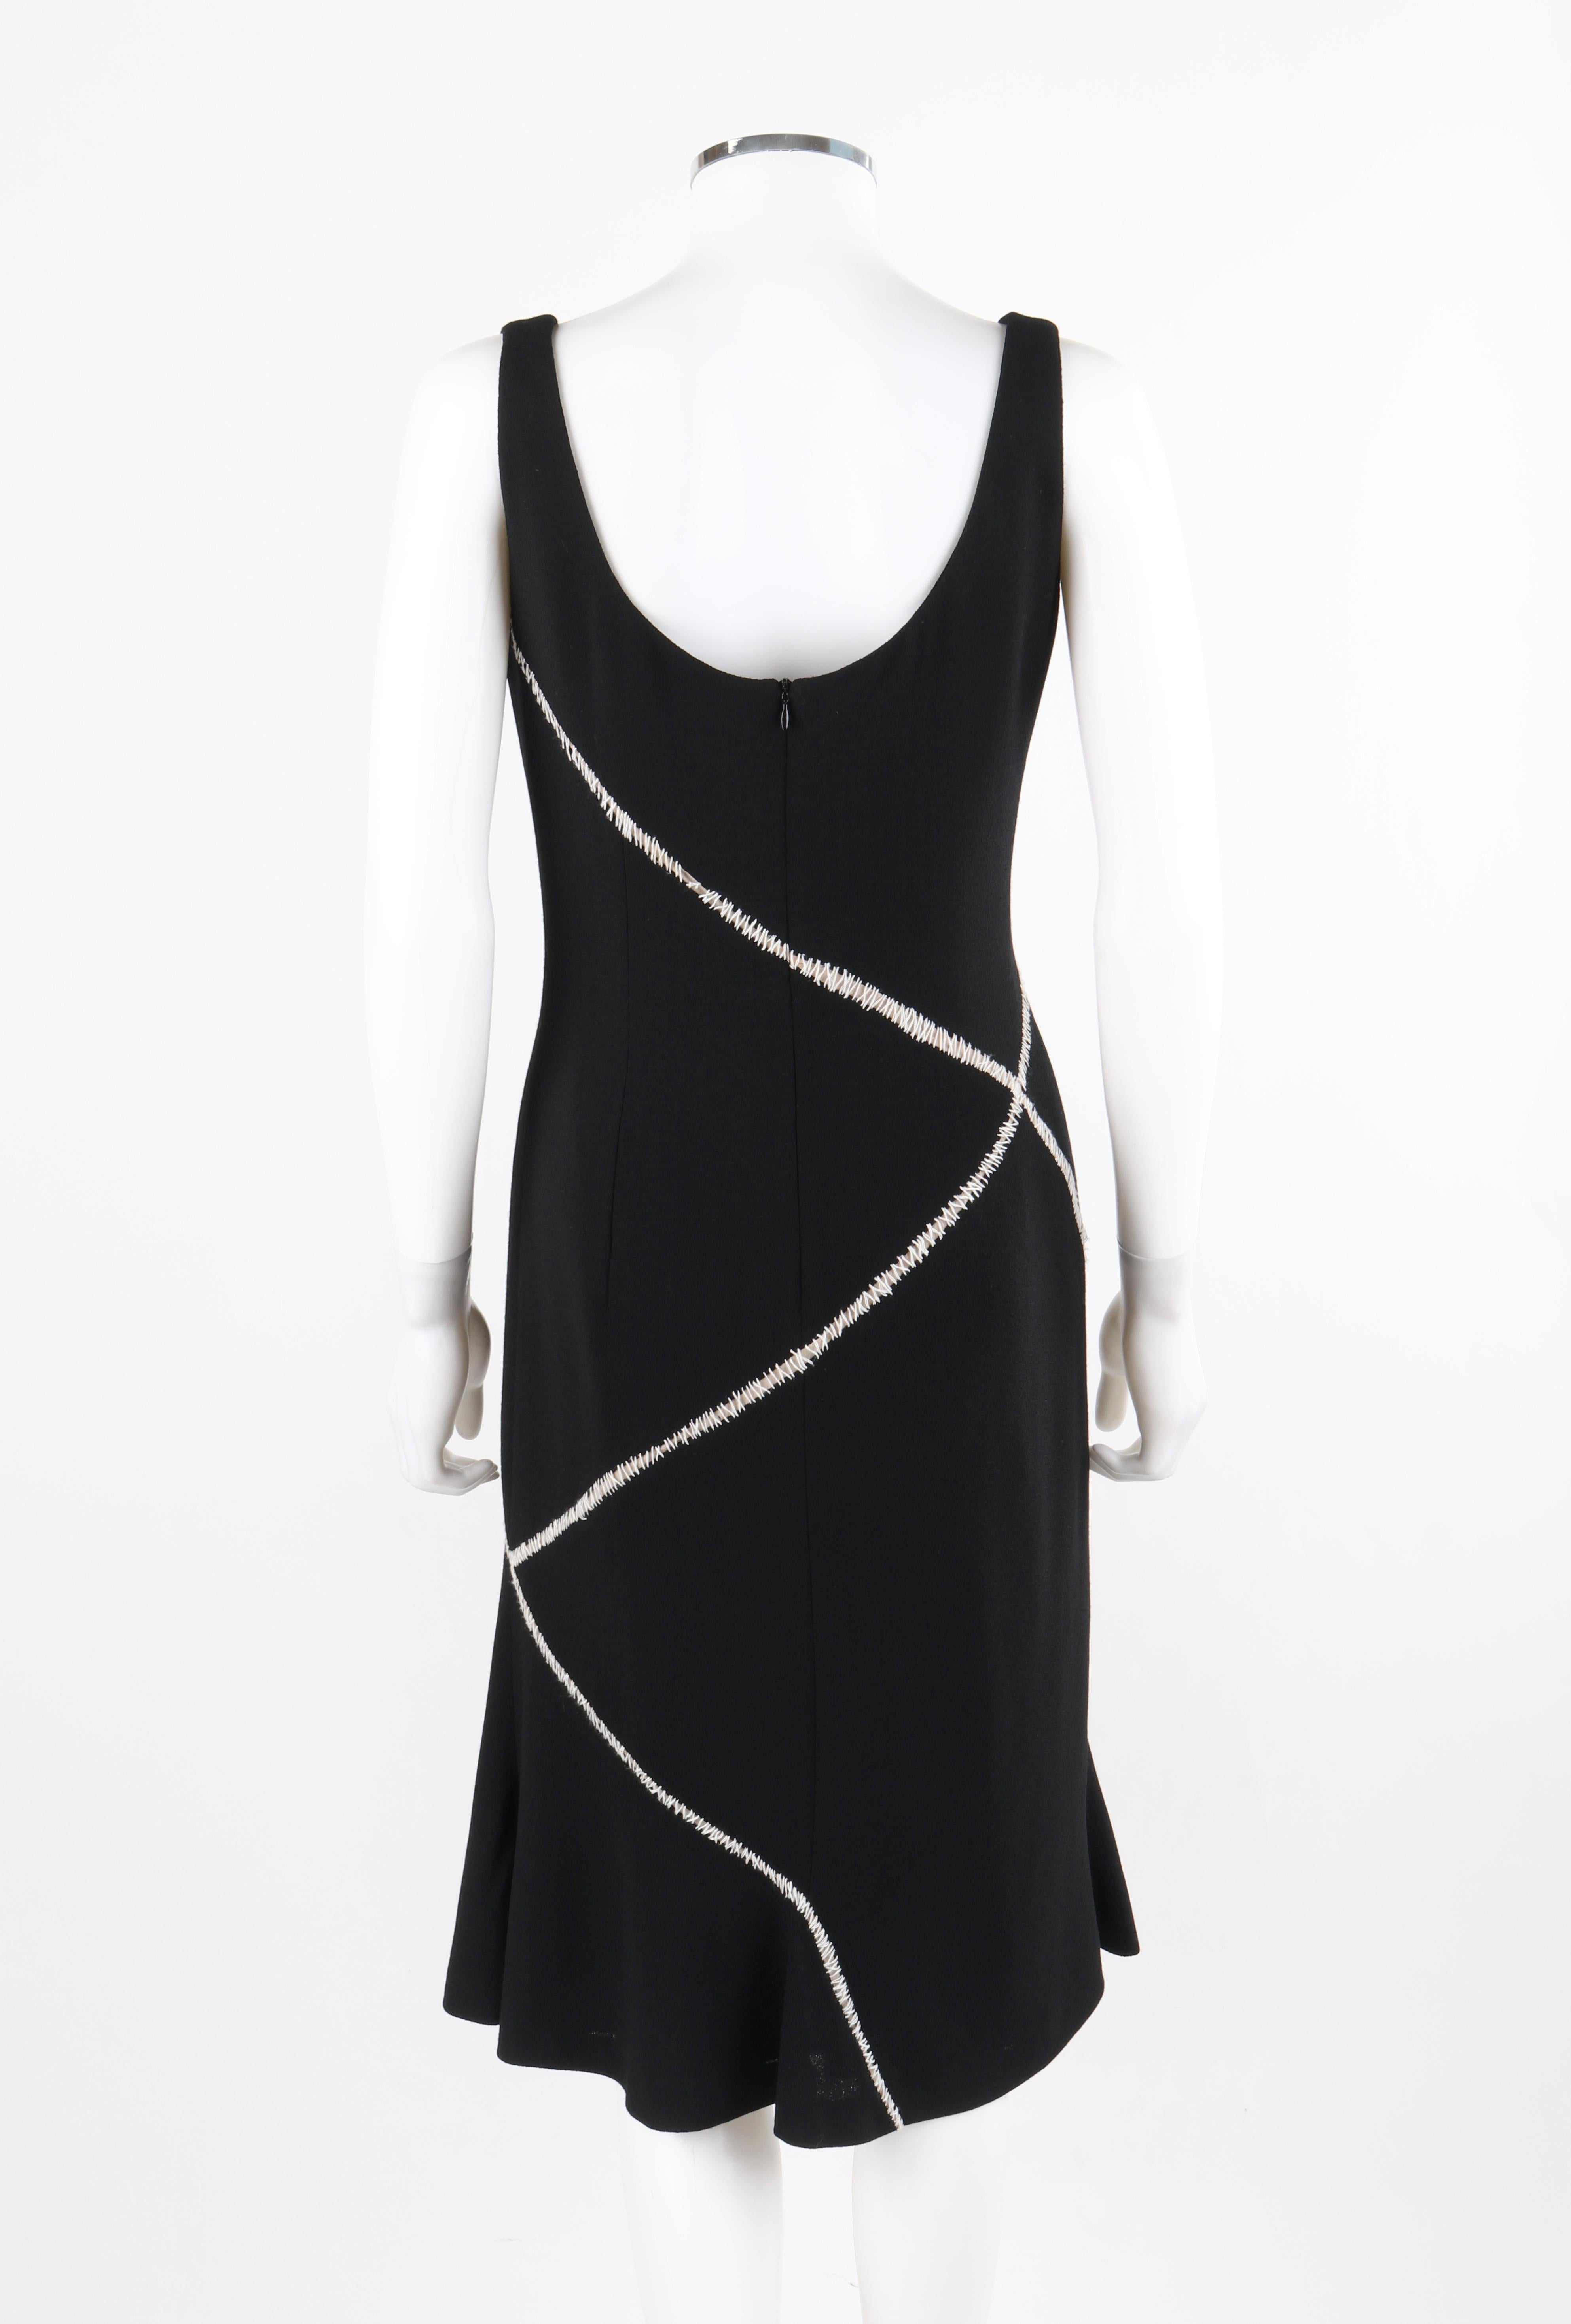 Women's ALEXANDER McQUEEN S/S 2003 Black Ivory Contrast Stitch Kick Flare Cocktail Dress For Sale